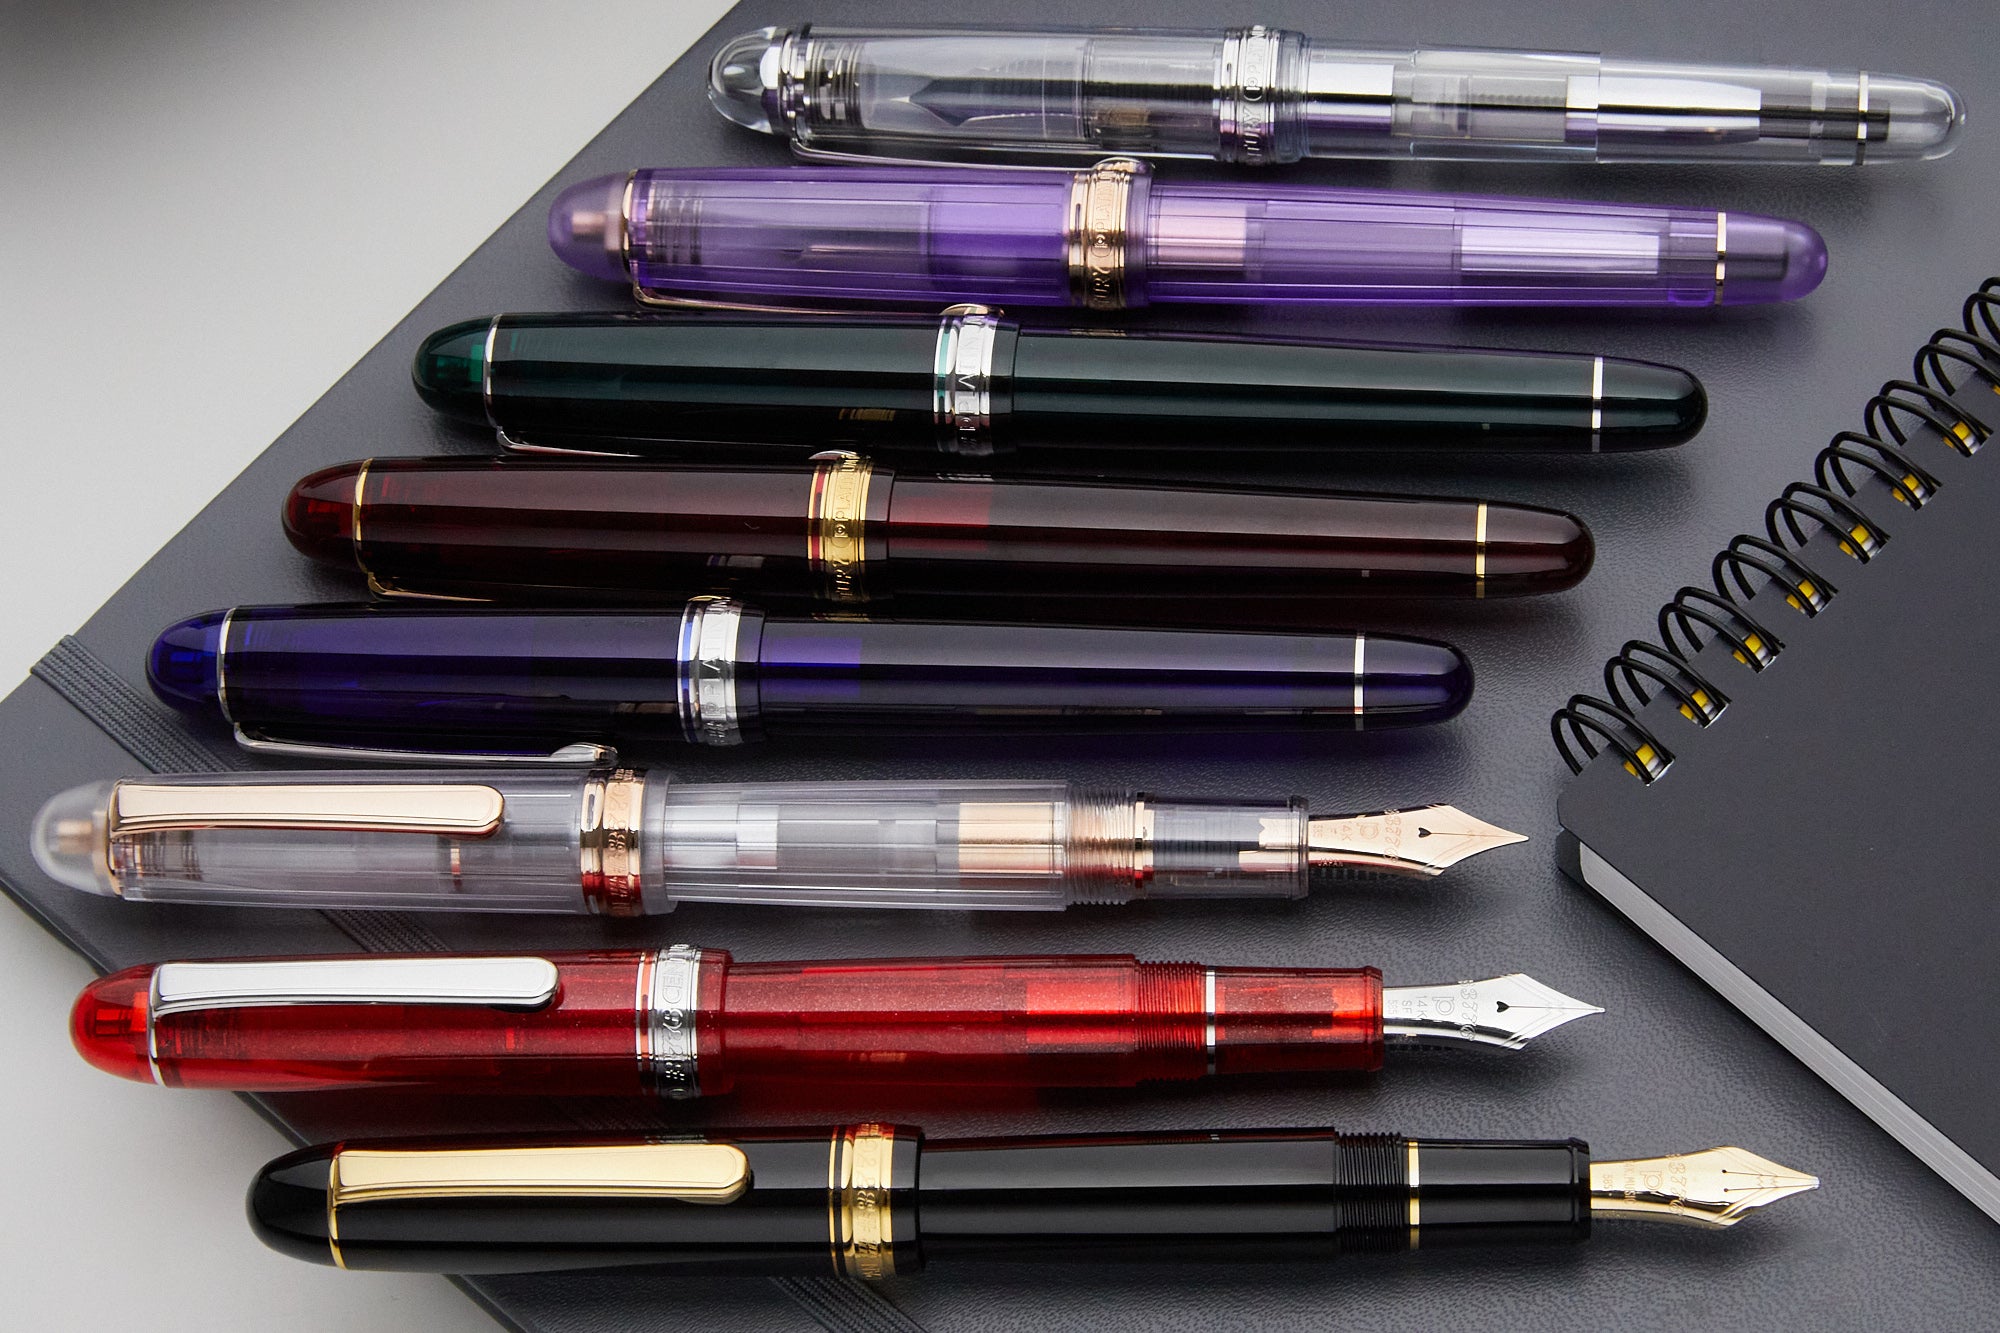 A neat angled lineup of colorful fountain pens